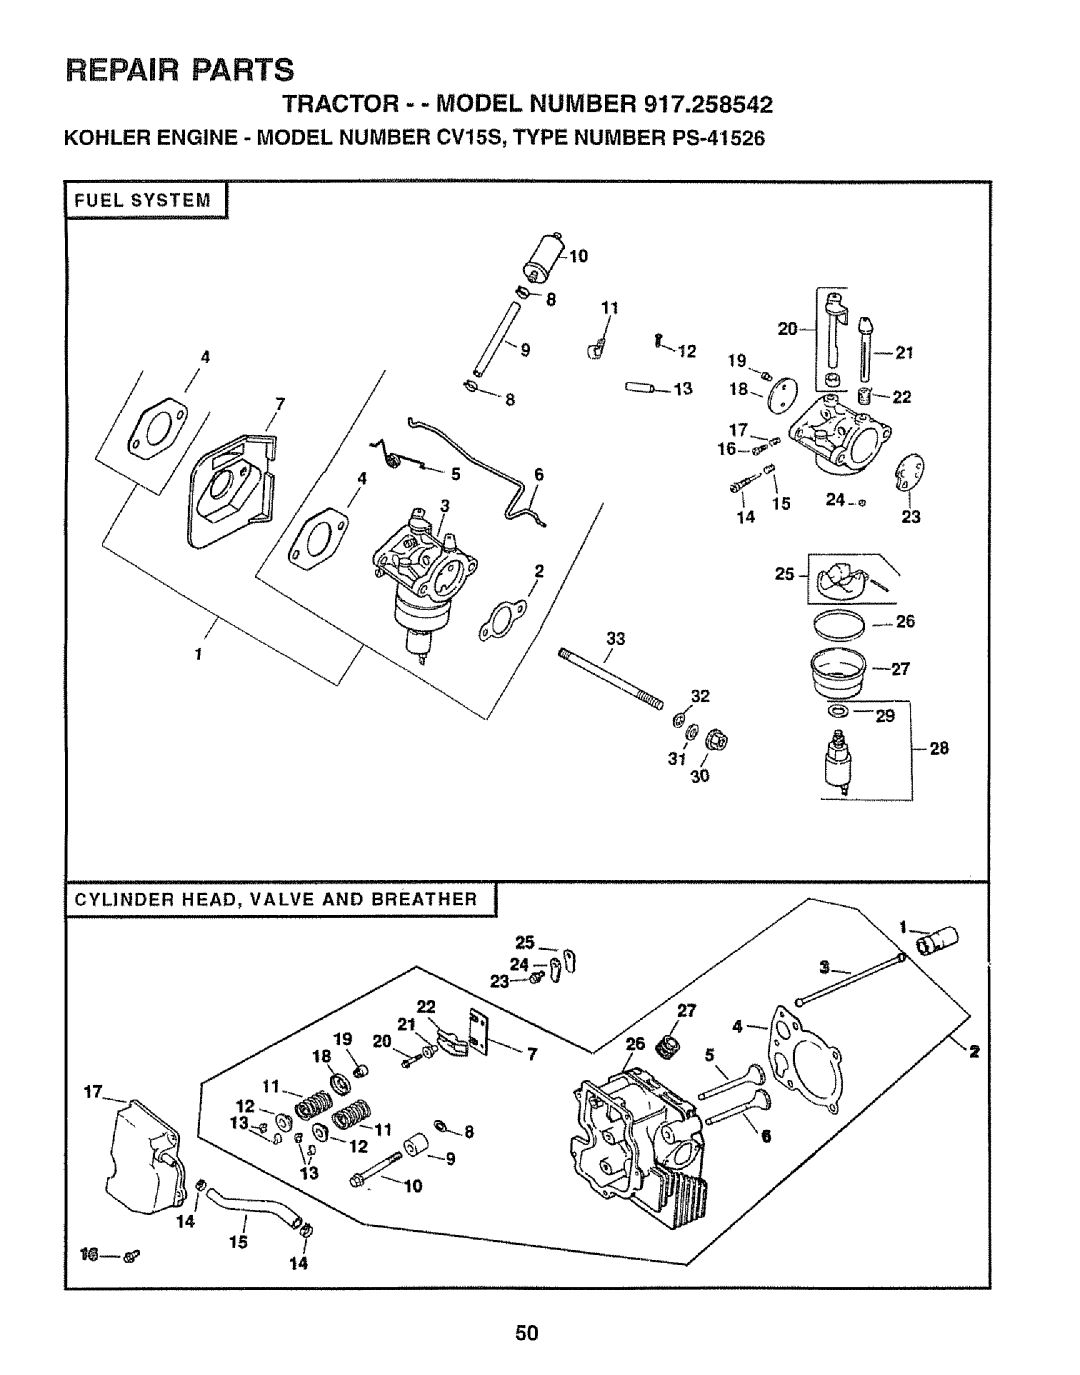 Sears 917.258542 owner manual Repair Parts, Tractor - - Model Number, CYLINDER HEAD, VALVE AND BREATHER 2227 21 19 18 